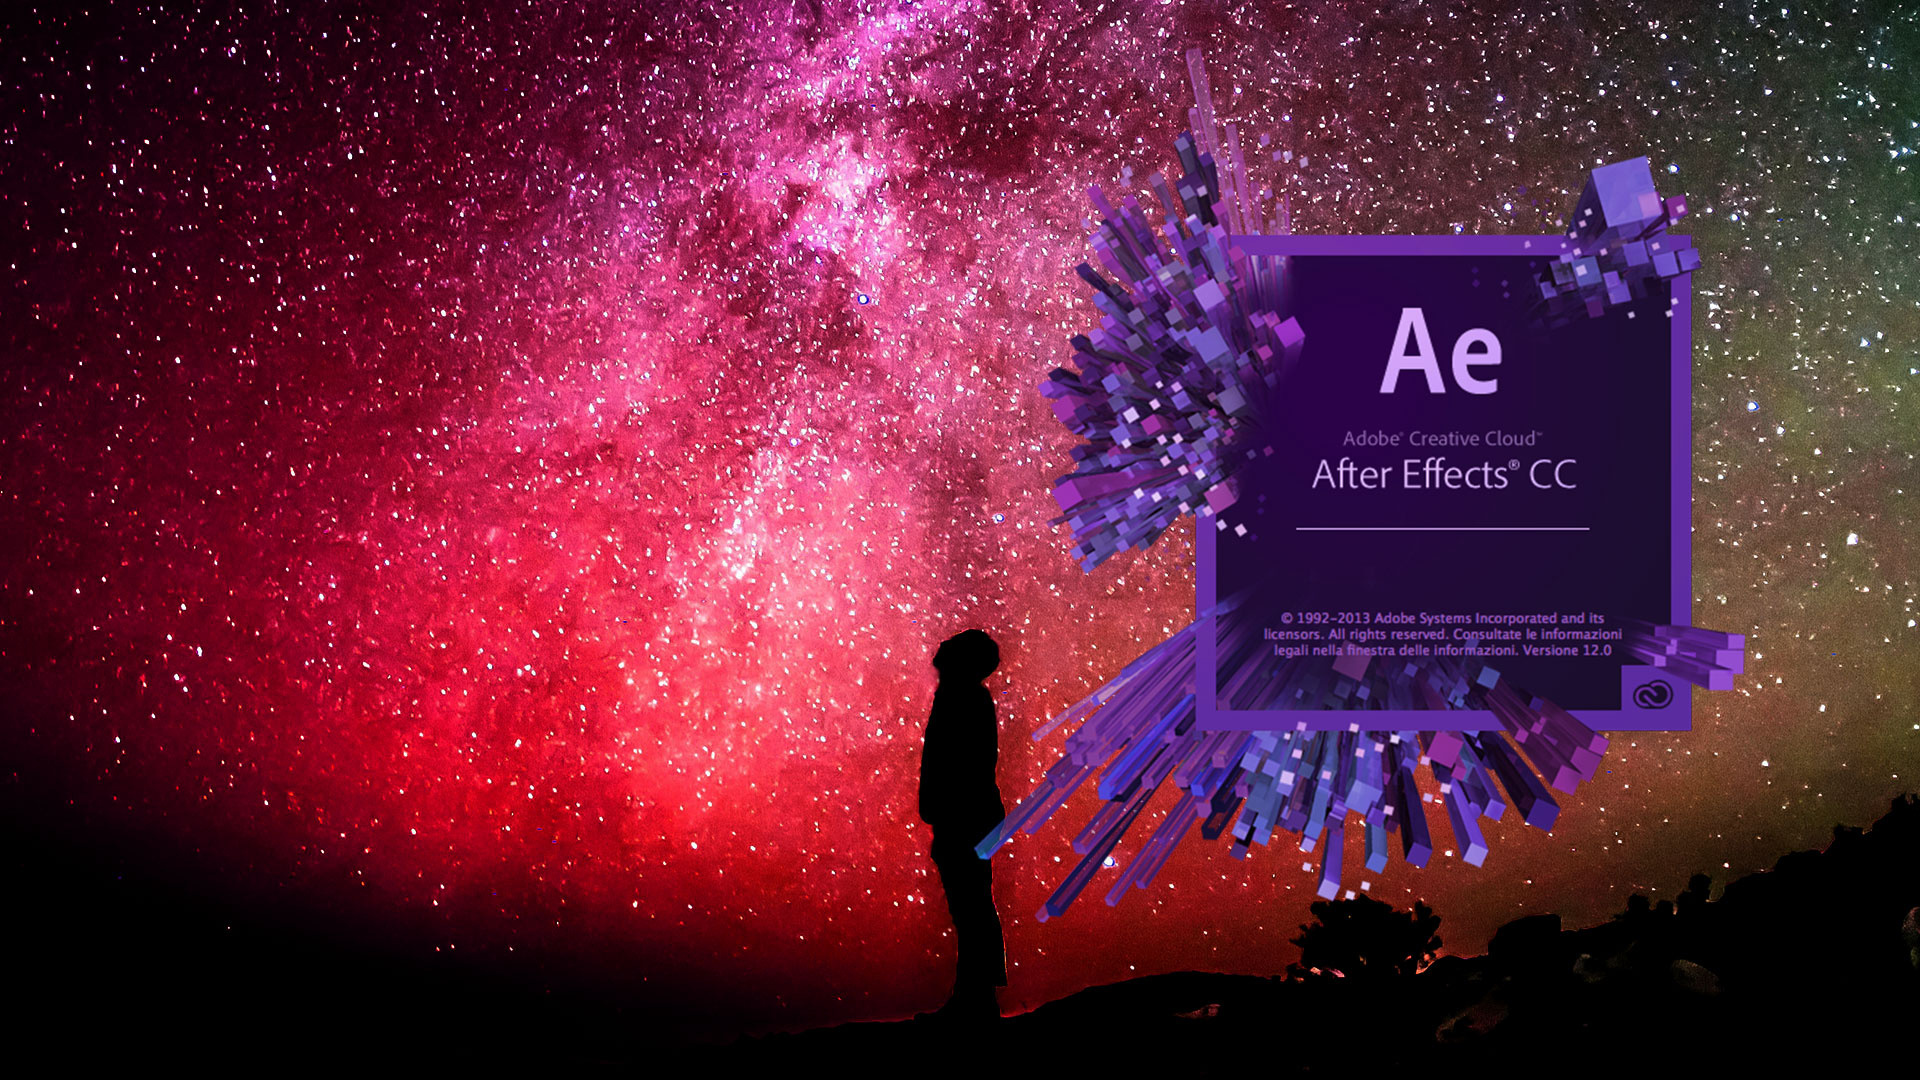 After effects packs. Adobe after Effects. Adobe after Effects картинки. Приложение after Effects. Эффекты для адобе Афтер эффект.